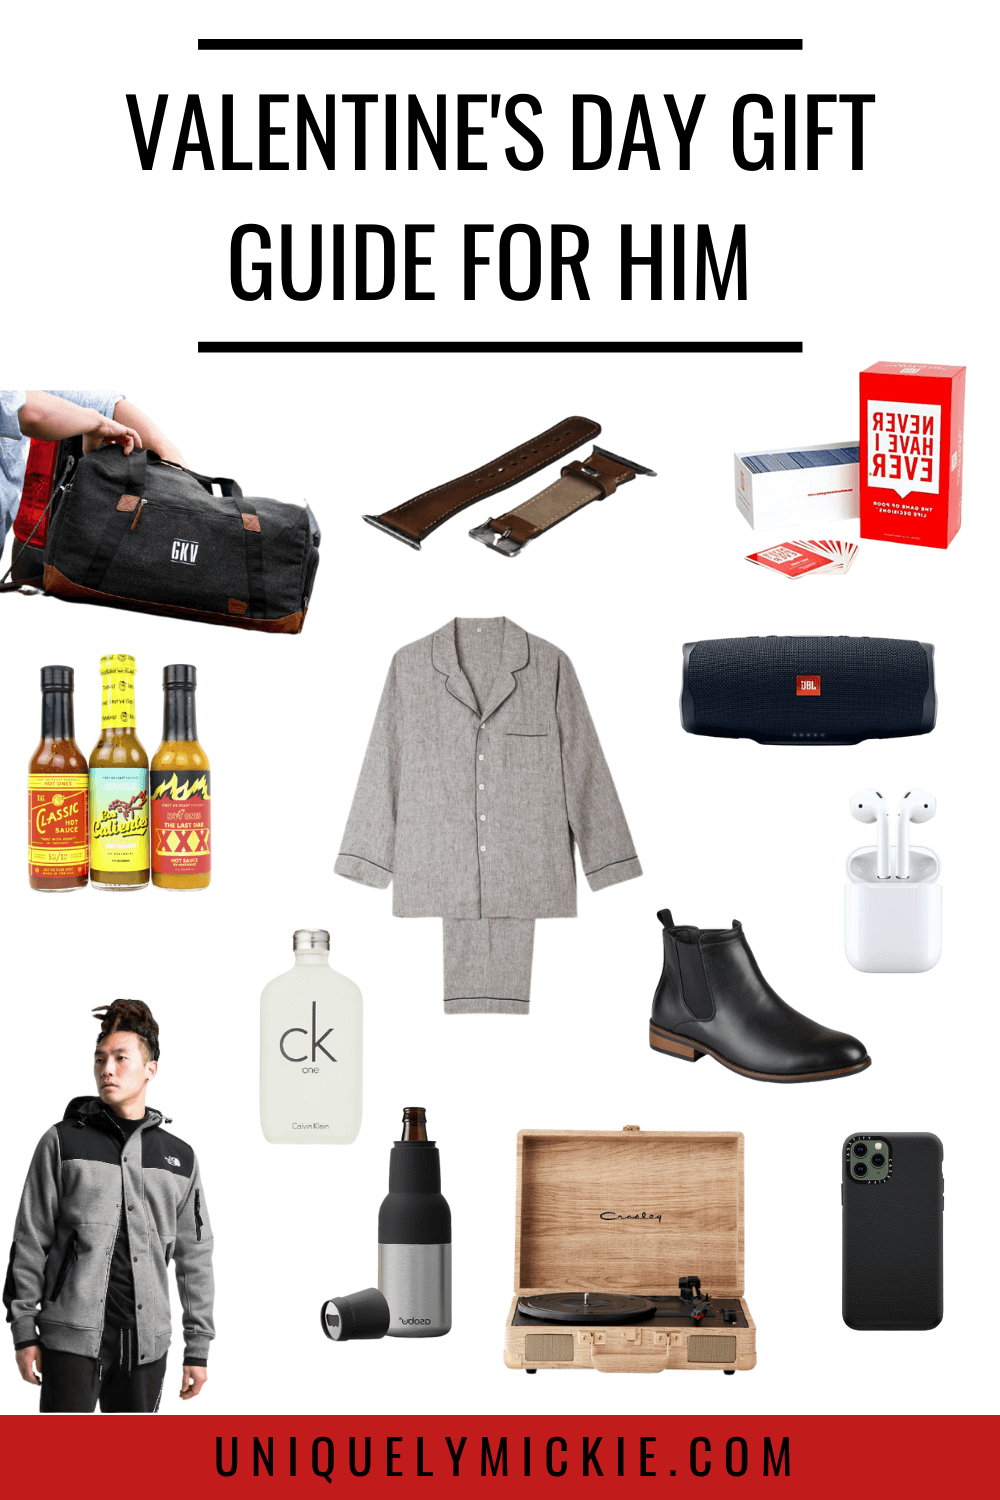 Men can be so hard to shop for, so hopefully this Valentine’s Gift Guide for Him helps you shop for the man in your life with ease. I’ve included different items for different budgets and based on different preferences. #valentinesdaygiftideasformen #boyfriendgiftbasketvalentinesday